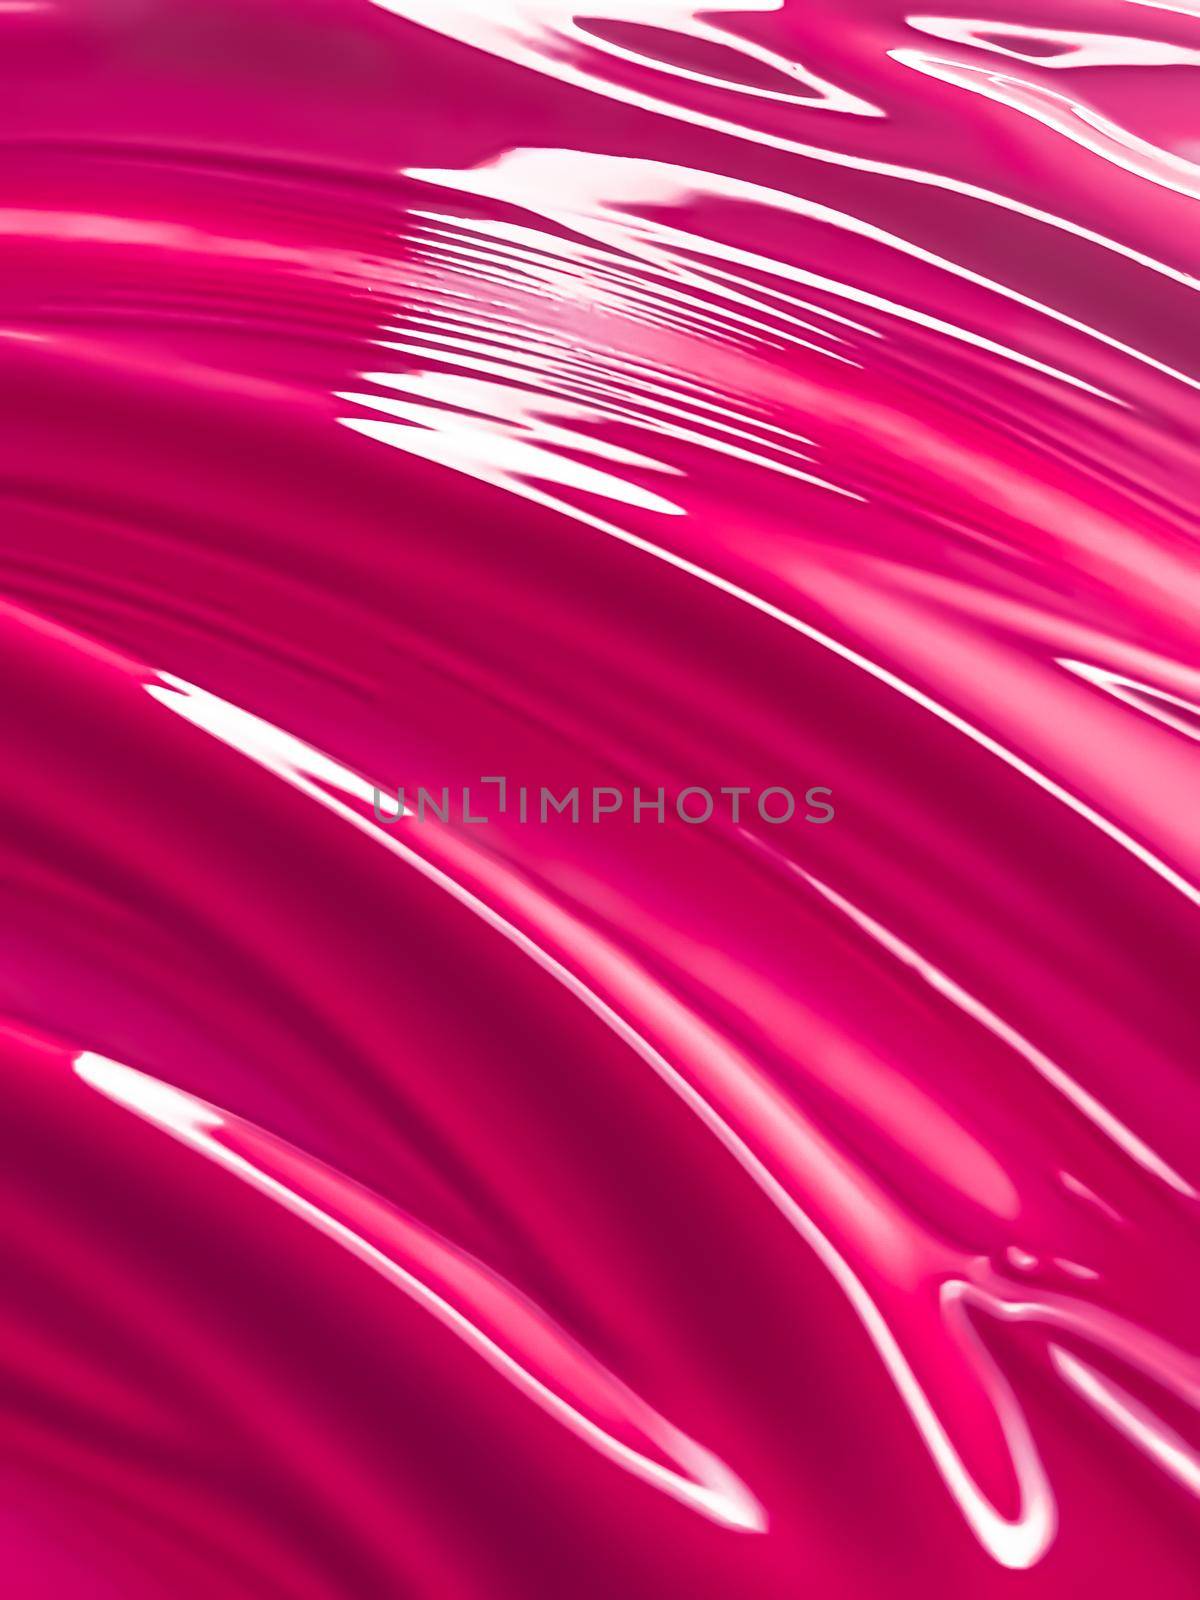 Glossy pink cosmetic texture as beauty make-up product background, cosmetics and luxury makeup brand design concept